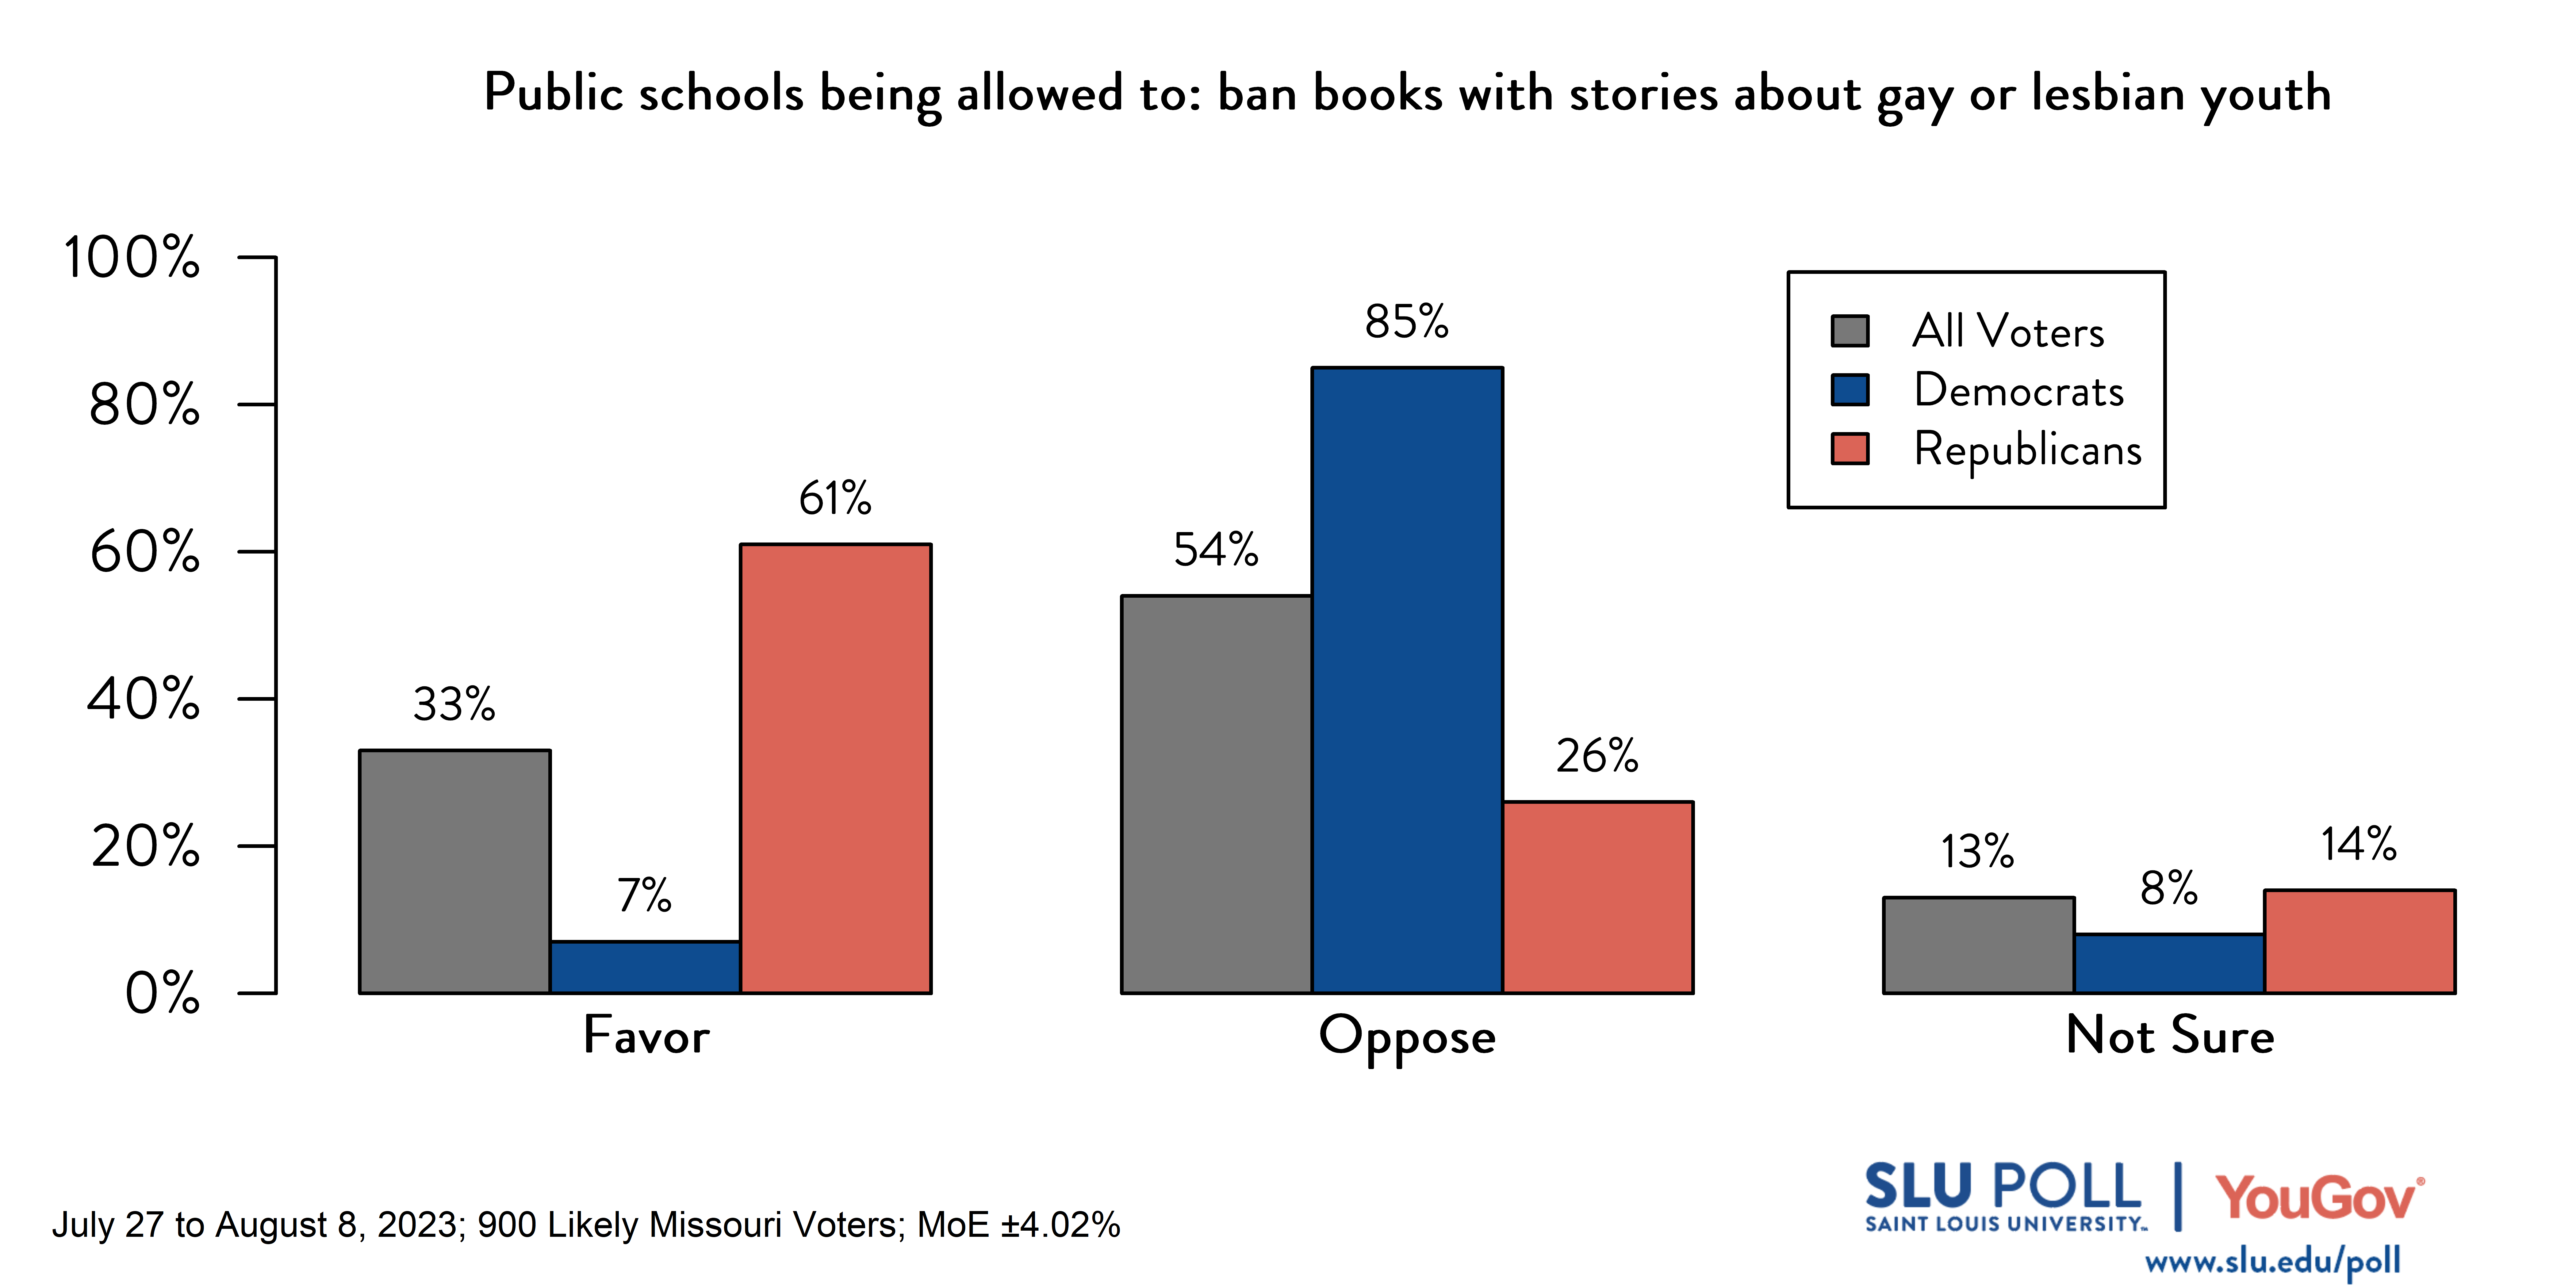 Likely voters' responses to 'Do you favor or oppose public schools being allowed to: ban books with stories about gay or lesbian youth?': 33% Favor, 54% Oppose, and 13% Not Sure. Democratic voters' responses: ' 7% Favor, 85% Oppose, and 8% Not Sure. Republican voters' responses: 61% Favor, 26% Oppose, and 14% Not Sure.